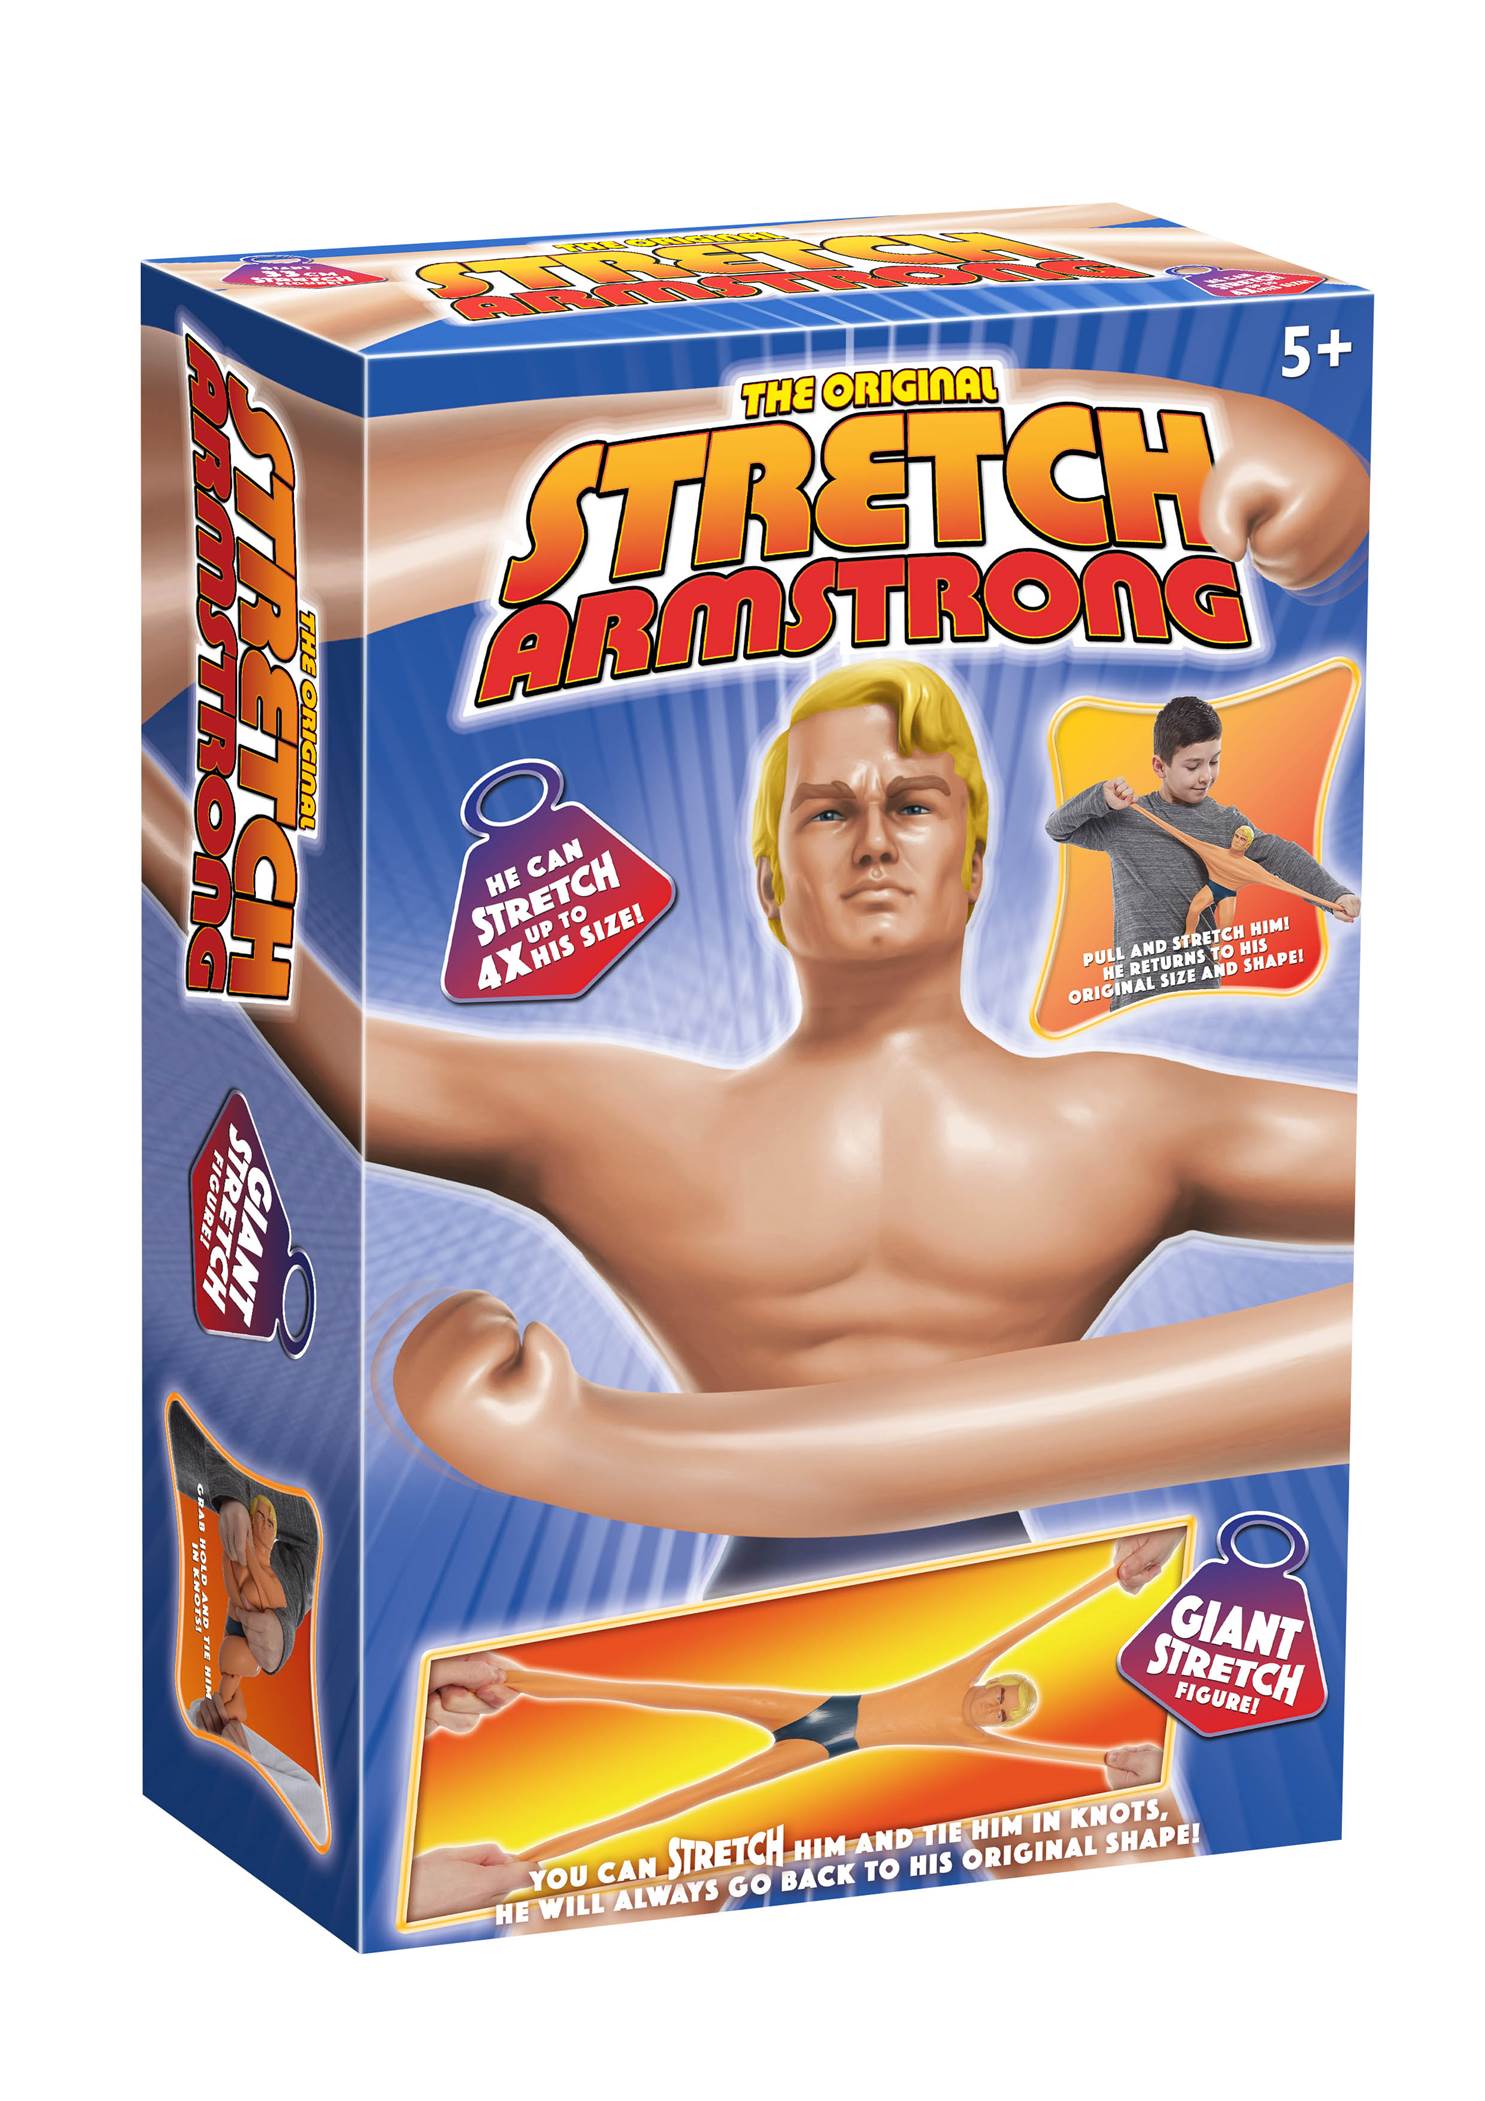 The Original Stretch Armstrong Figure Stretches up to 4 times his size 